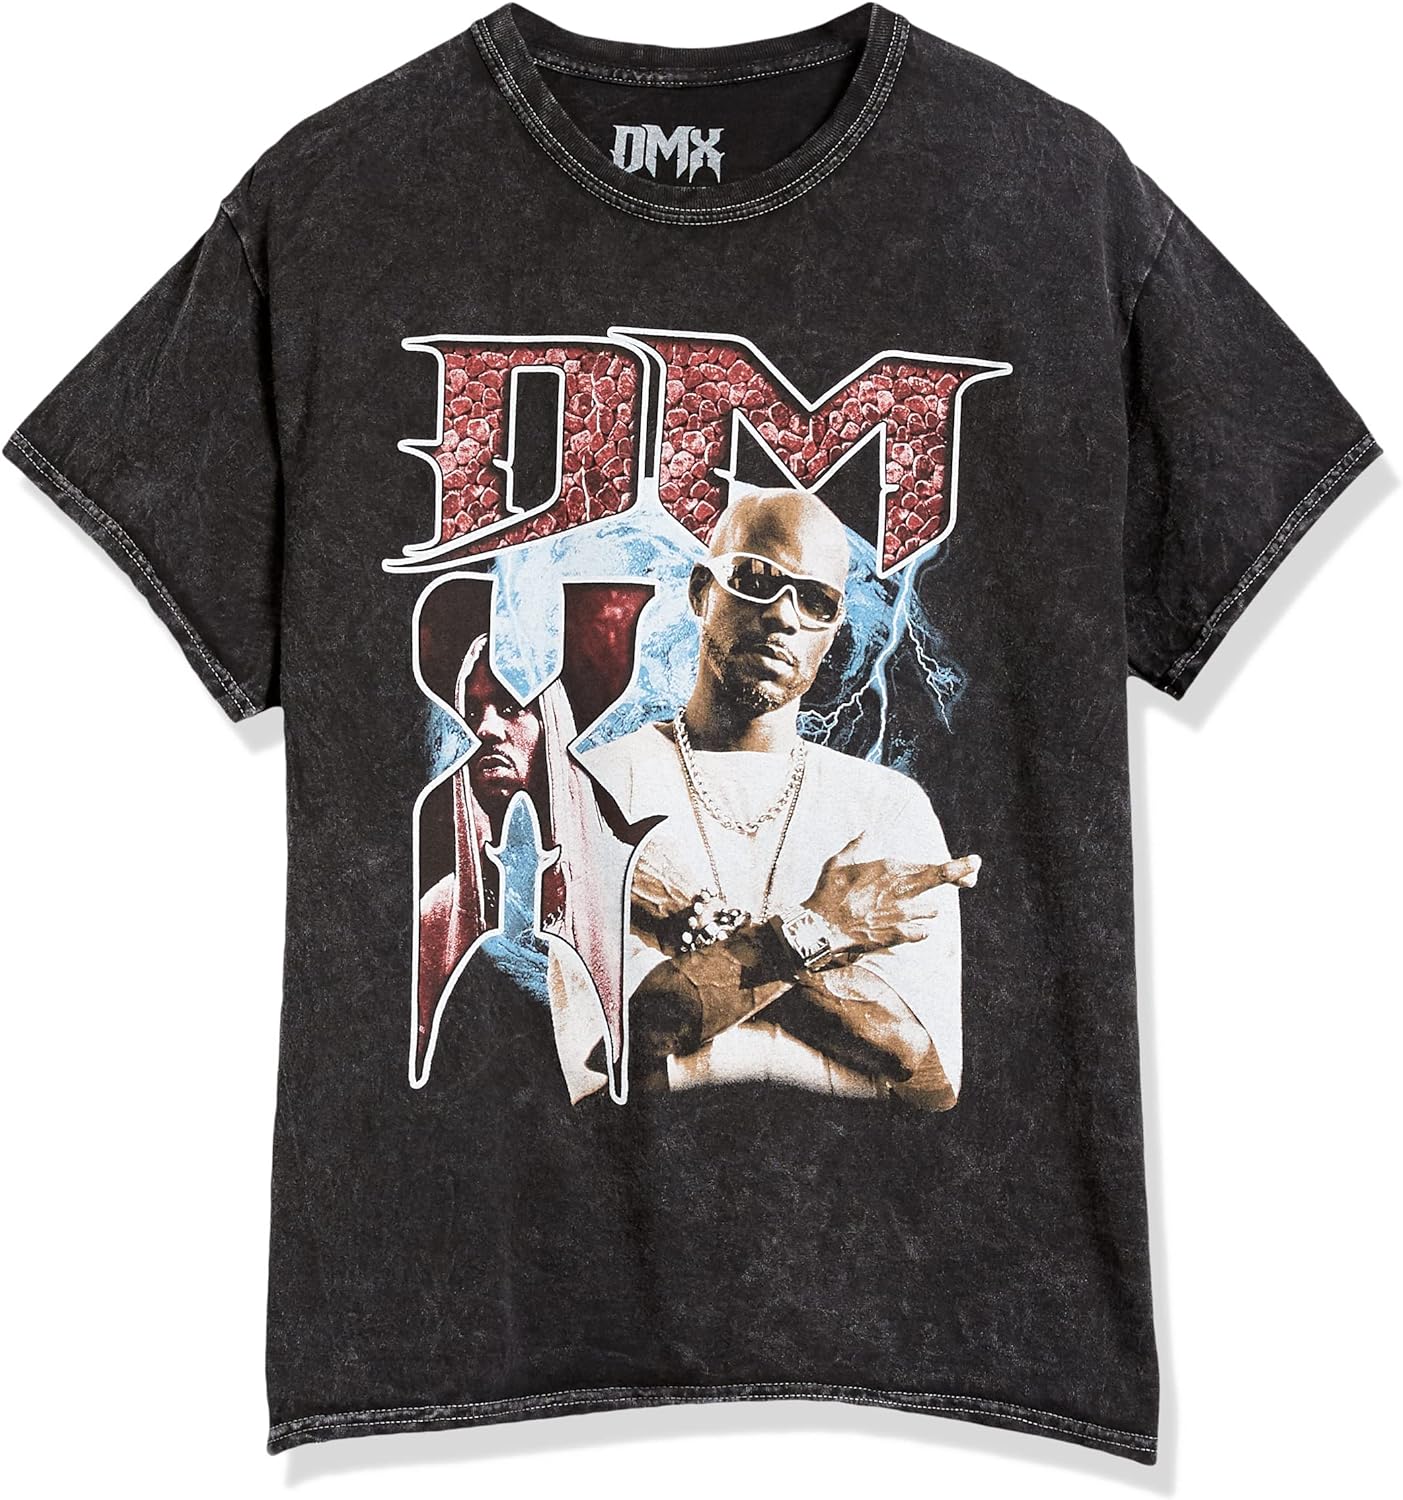 DMX T-shirt - Officially Licensed - New - NWT - Hip Hop Tees